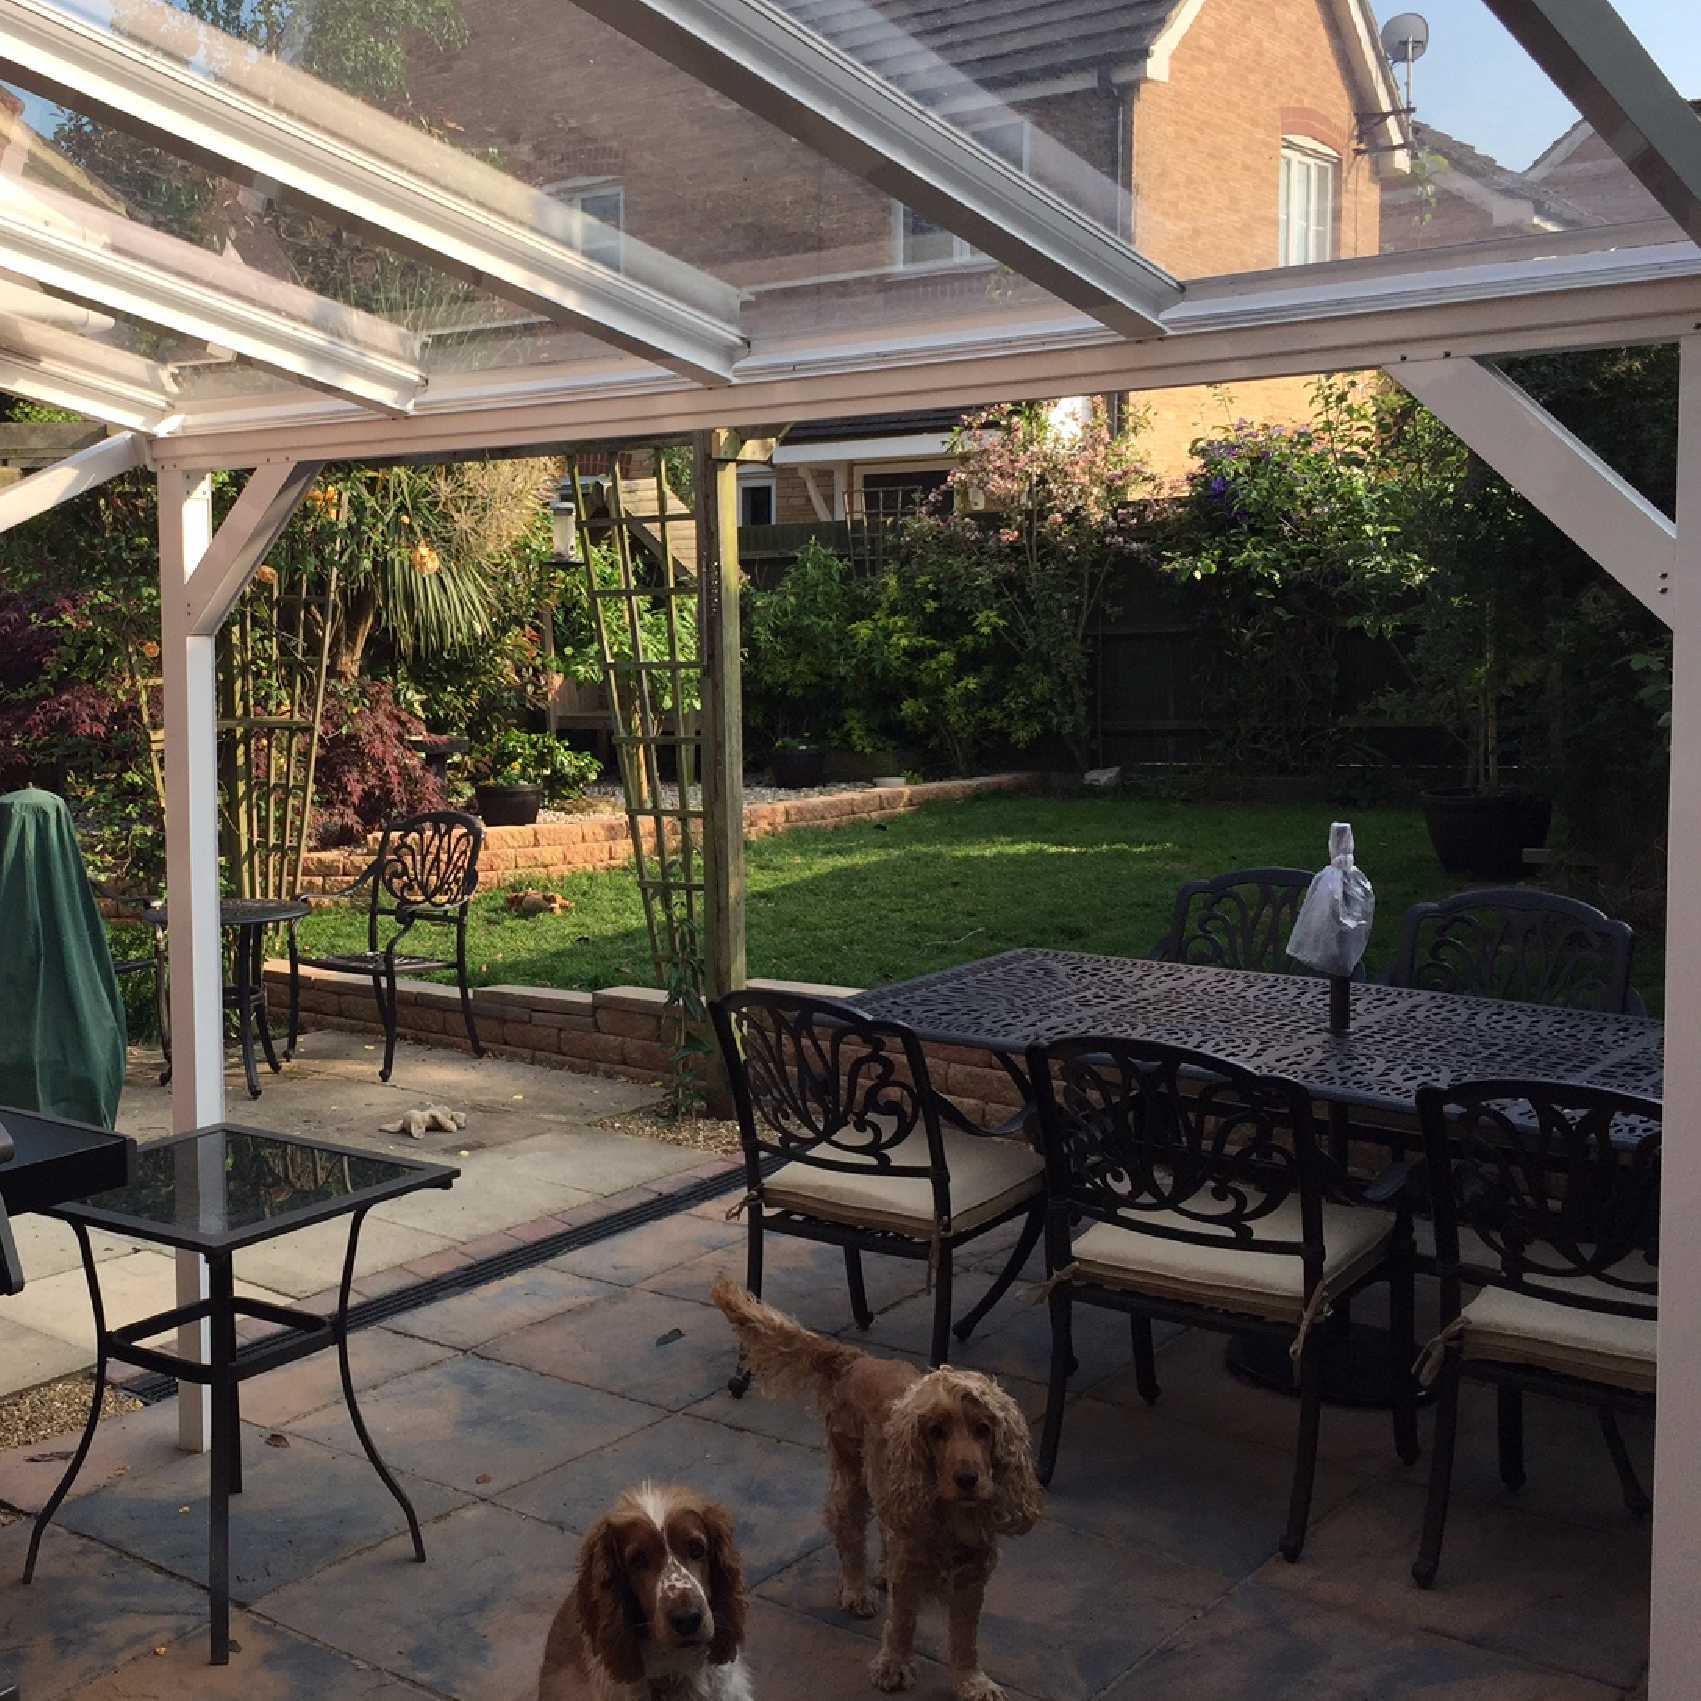 Affordable Omega Smart Lean-To Canopy, White UNGLAZED for 6mm Glazing - 2.1m (W) x 2.0m (P), (2) Supporting Posts